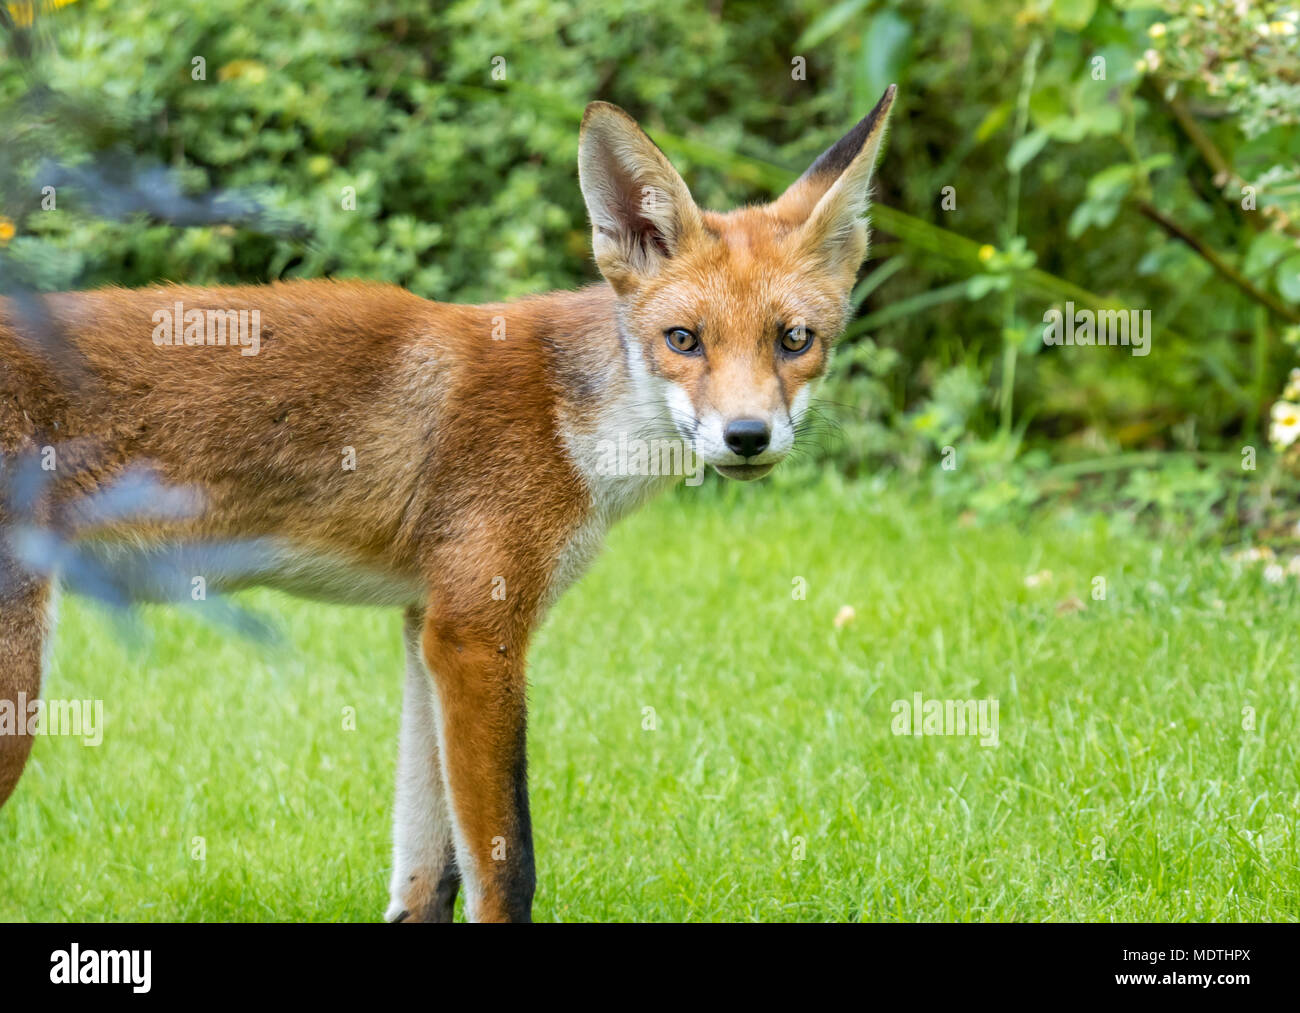 Close up of urban red fox, Vulpes vulpes, standing in London garden, England, UK Stock Photo